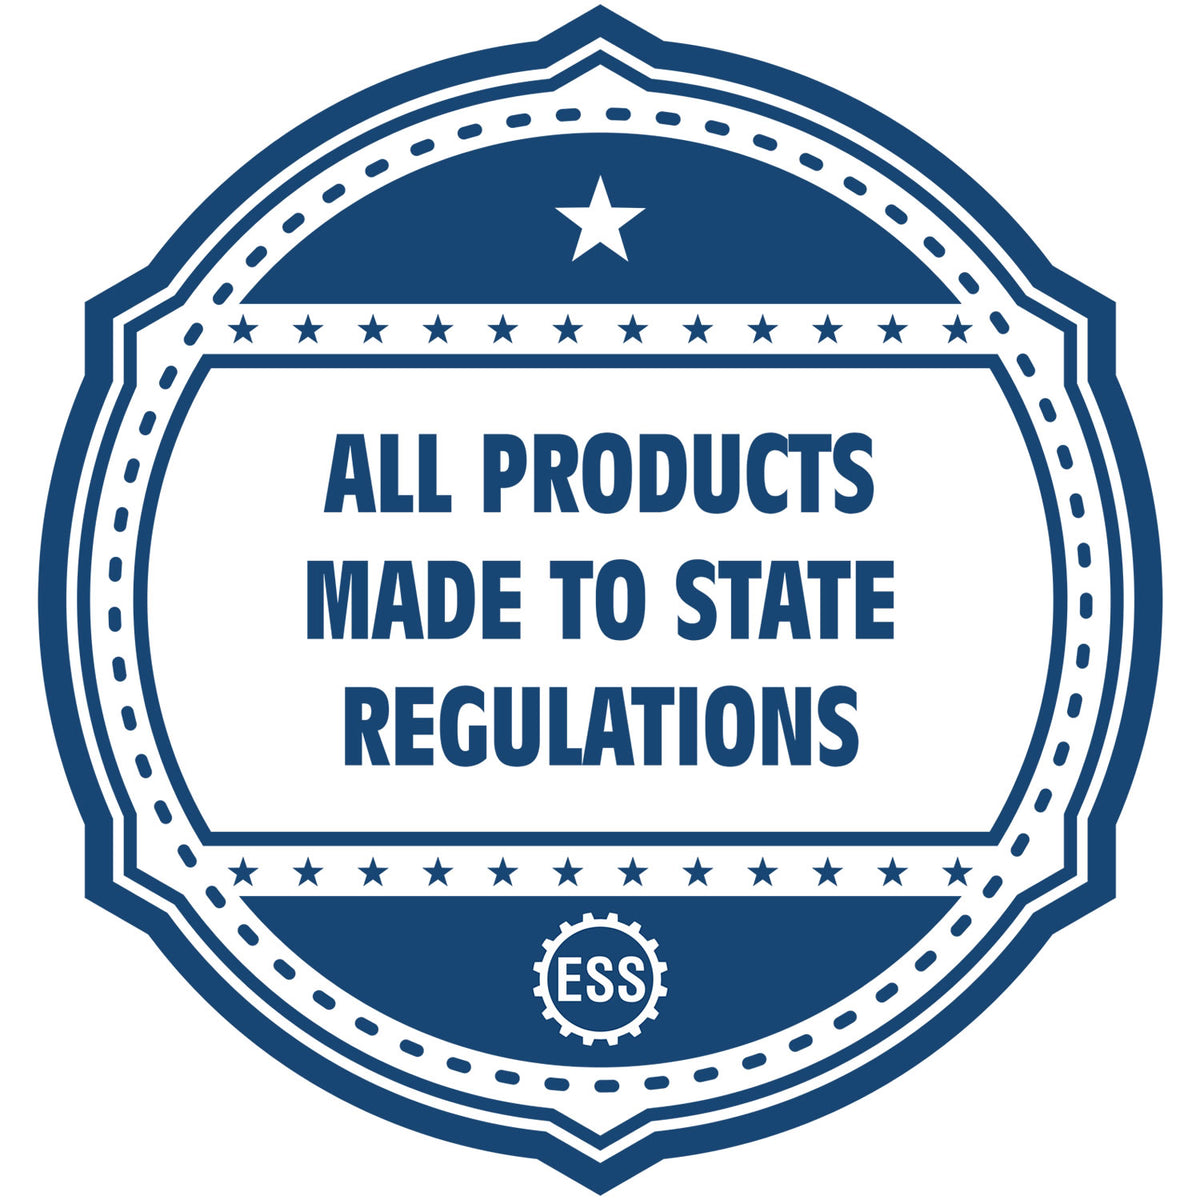 An icon or badge element for the Soft Guam Professional Engineer Seal showing that this product is made in compliance with state regulations.